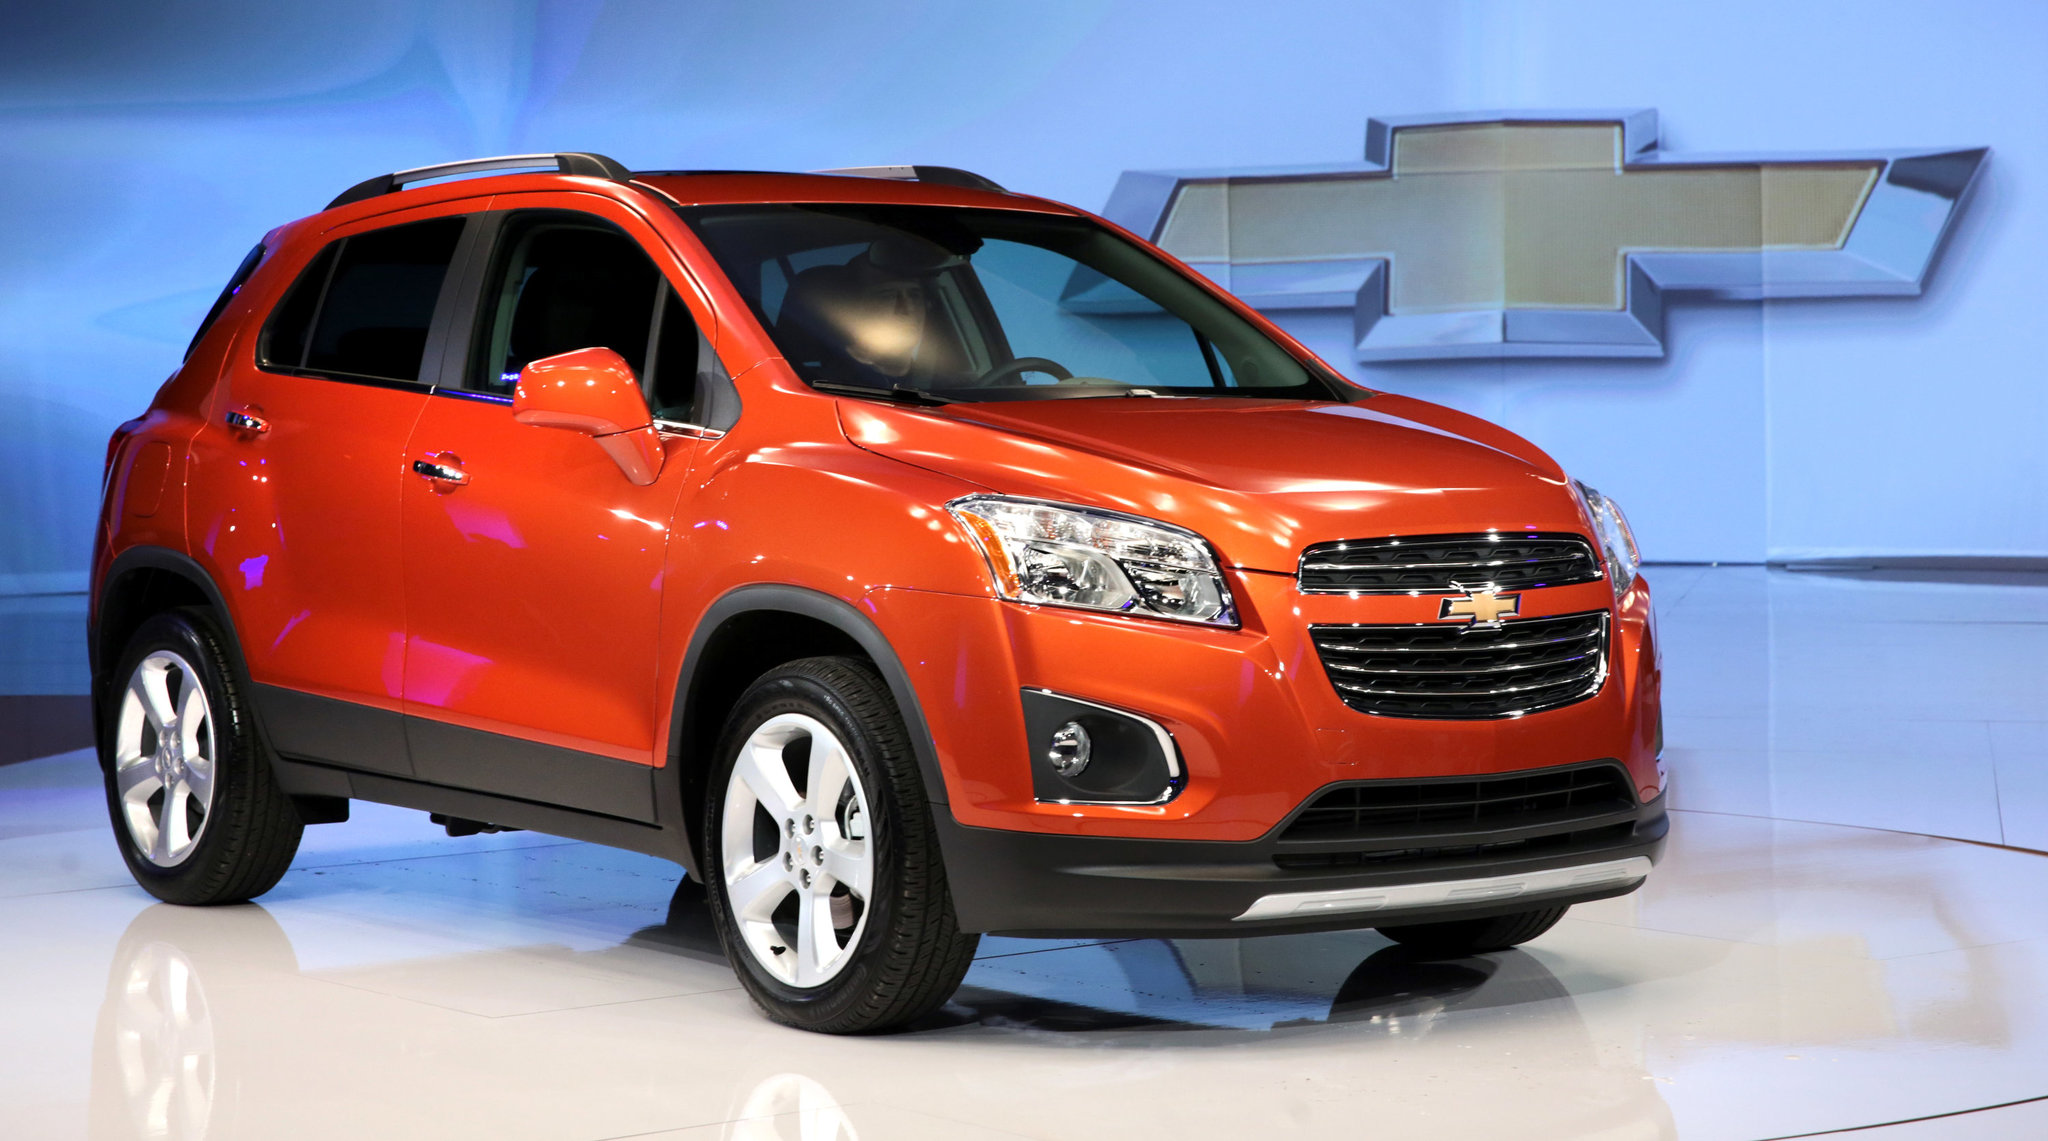 2015 Chevrolet Trax - The New York Times